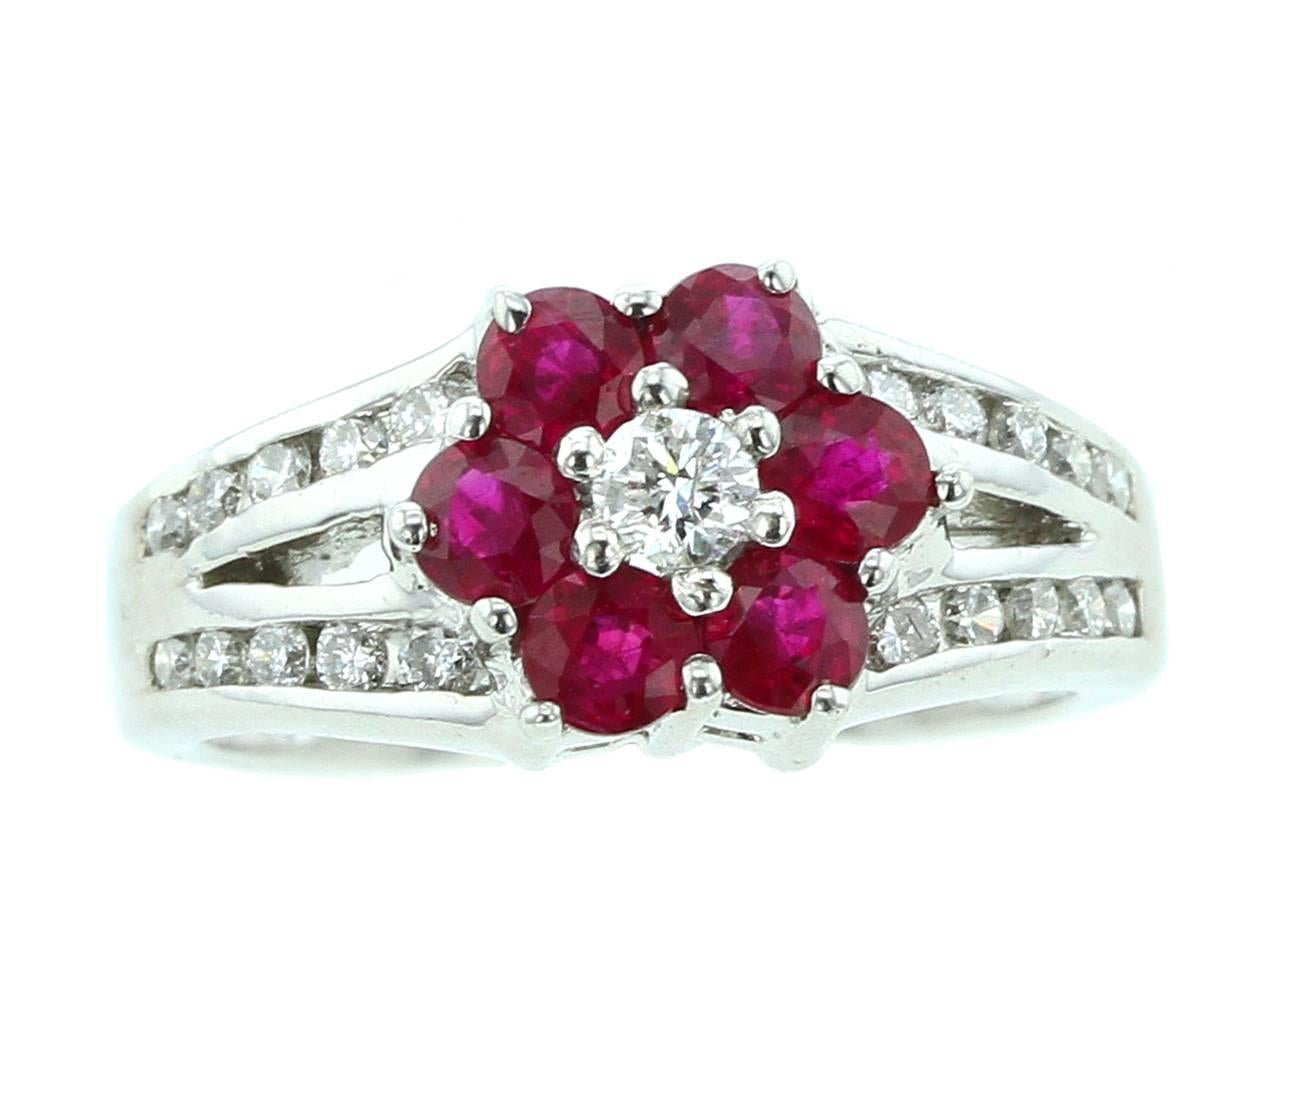 A floral ring comprising of six round red rubies with a center diamond, accented with twenty diamonds on the mounting, 14K White Gold. 